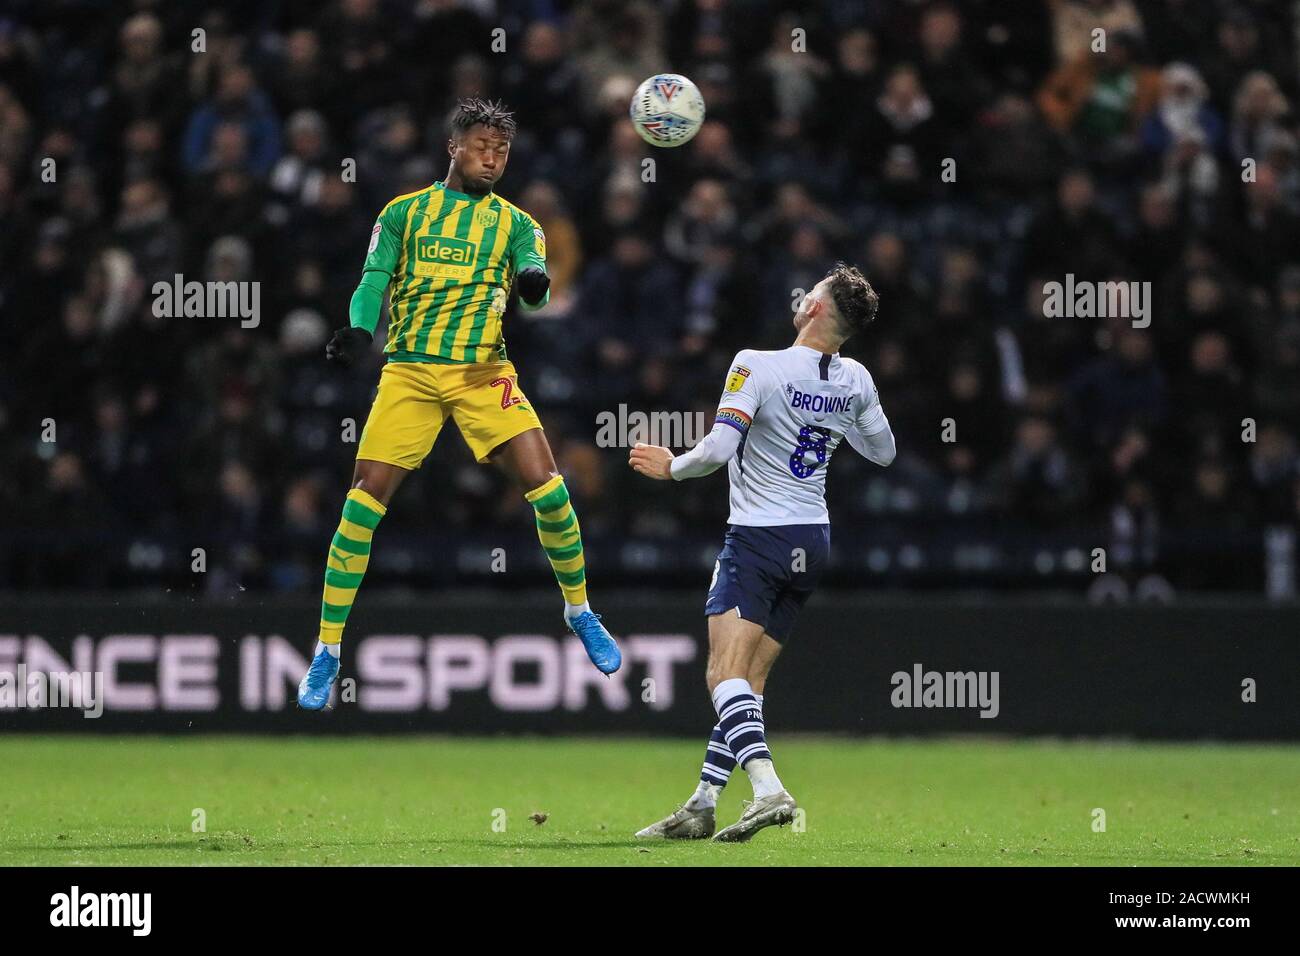 2nd December 2019, Deepdale, Preston, England; Sky Bet Championship, Preston North End v West Bromwich Albion : Kyle Edwards (21) of West Bromwich Albion heads clear as Alan Browne (8) of Preston North End pressures  Credit: Mark Cosgrove/News Images Stock Photo